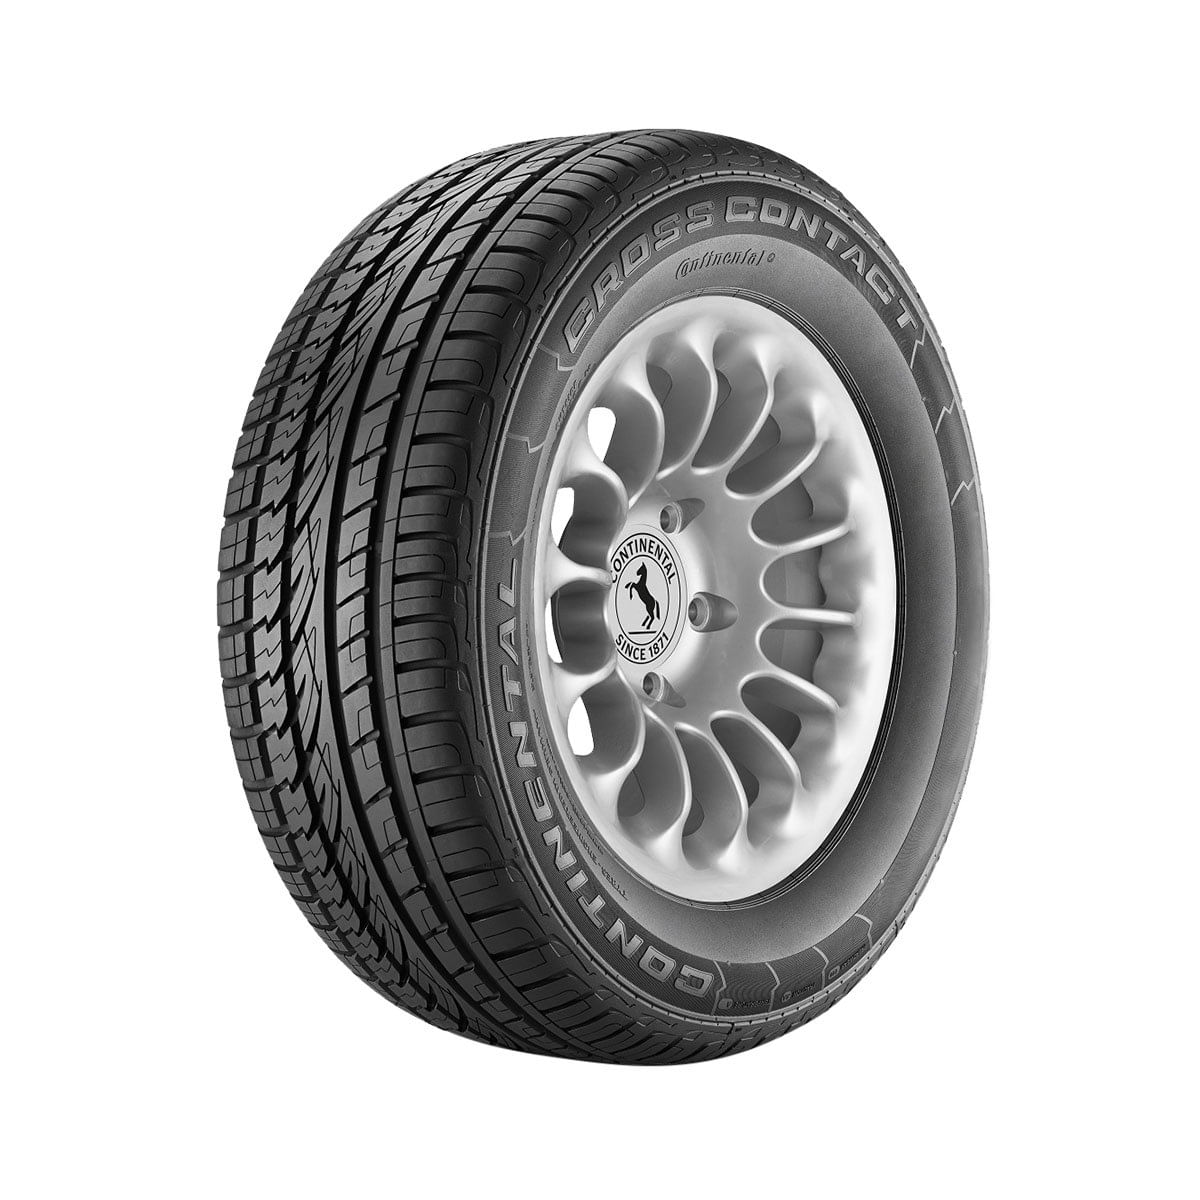 5745292_Pneu Aro 18 255/55 R 18 Continental CrossContact UHP 3589700000_1_Zoom